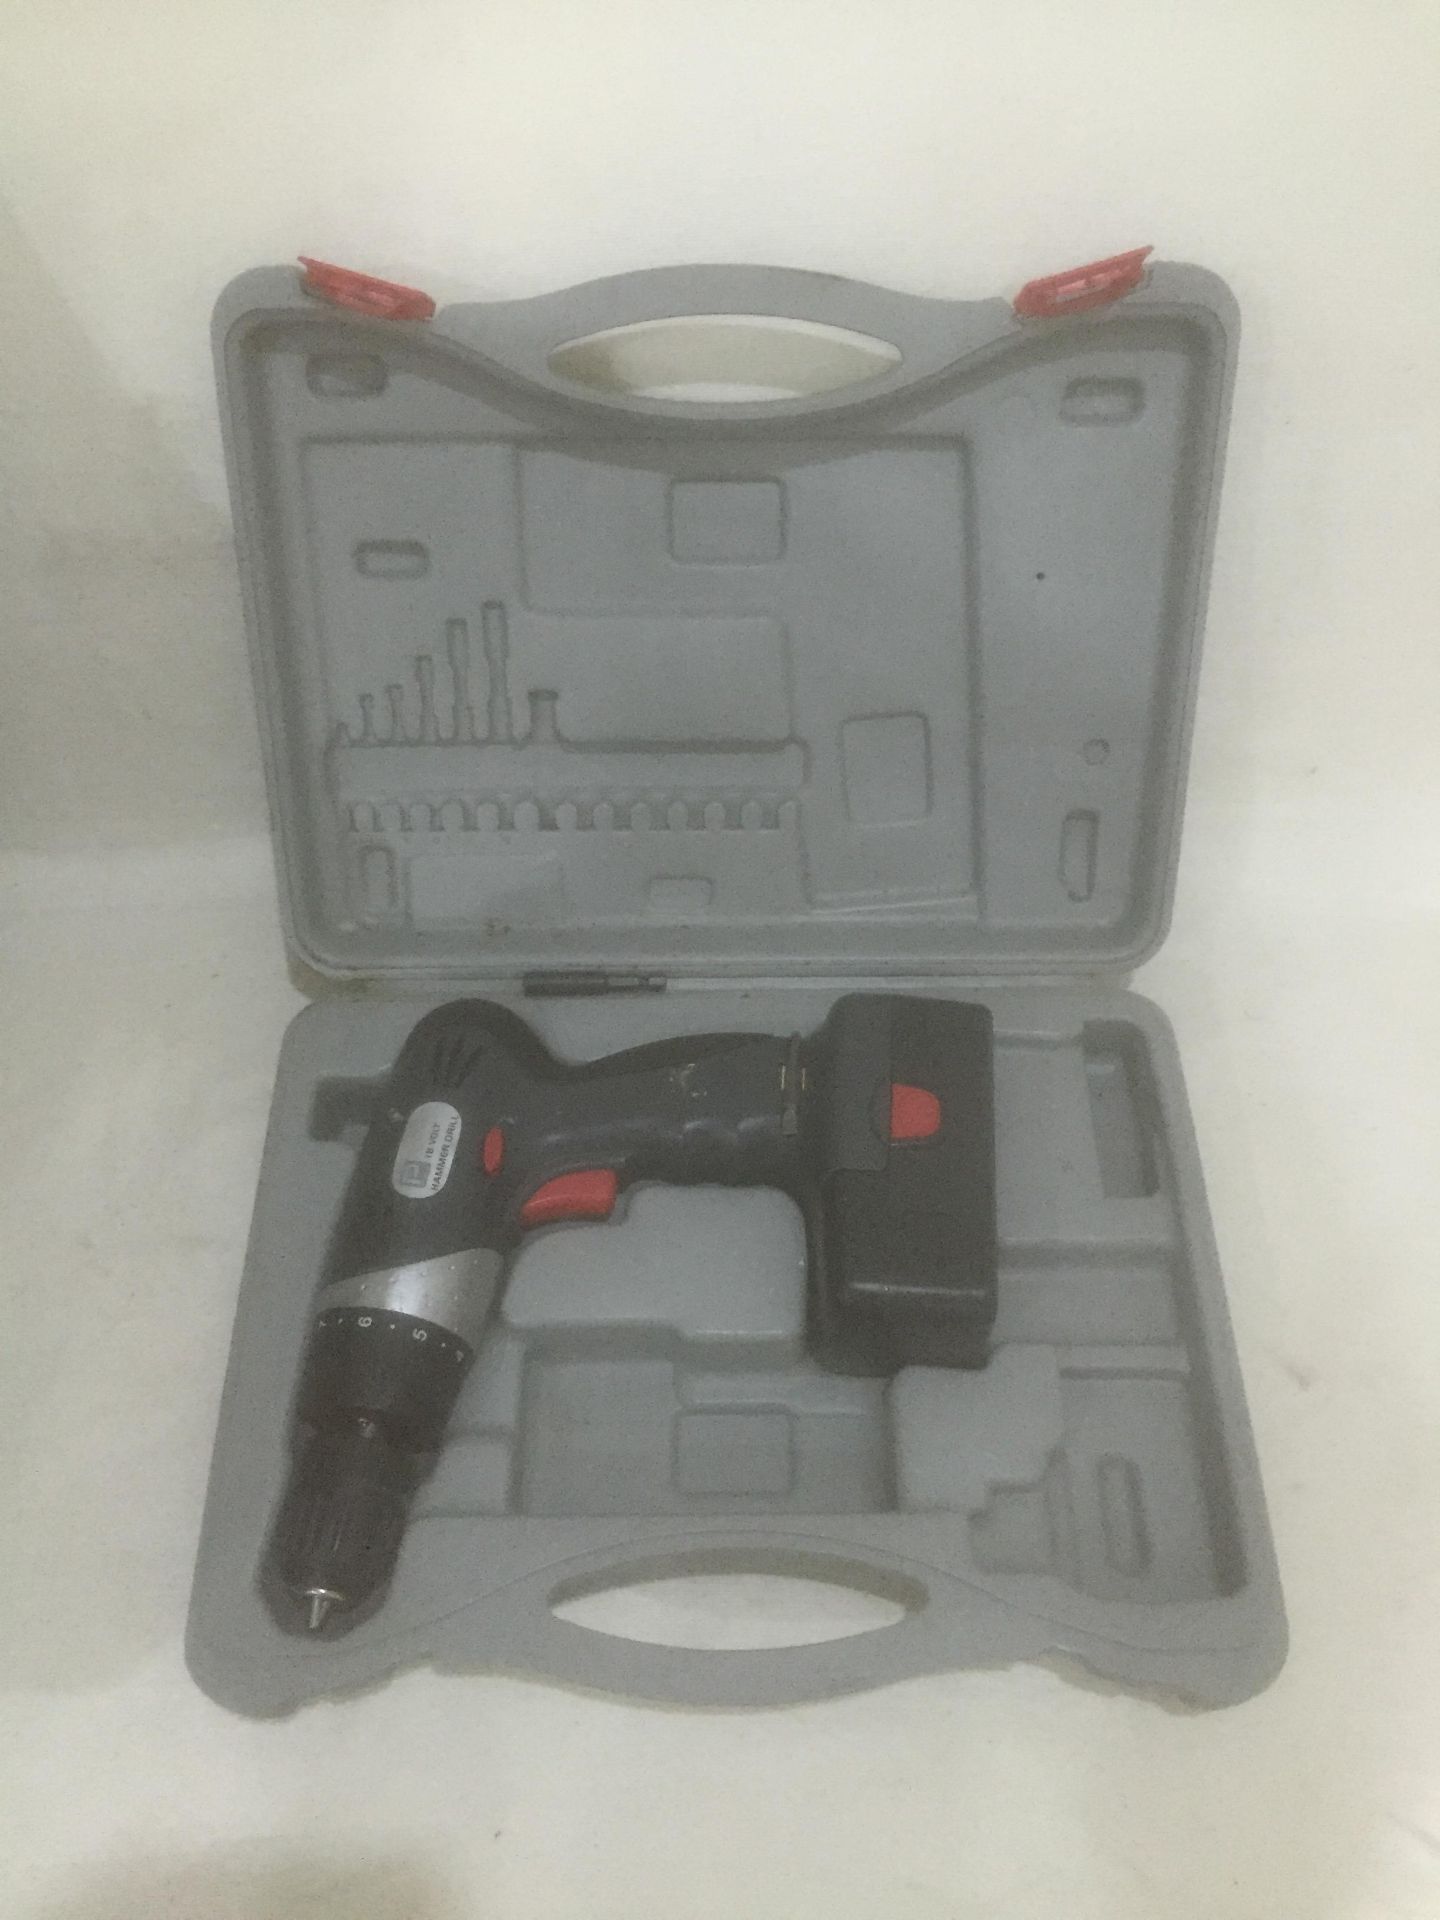 PERFORMANCE 18V CORDLESS DRILL - USED